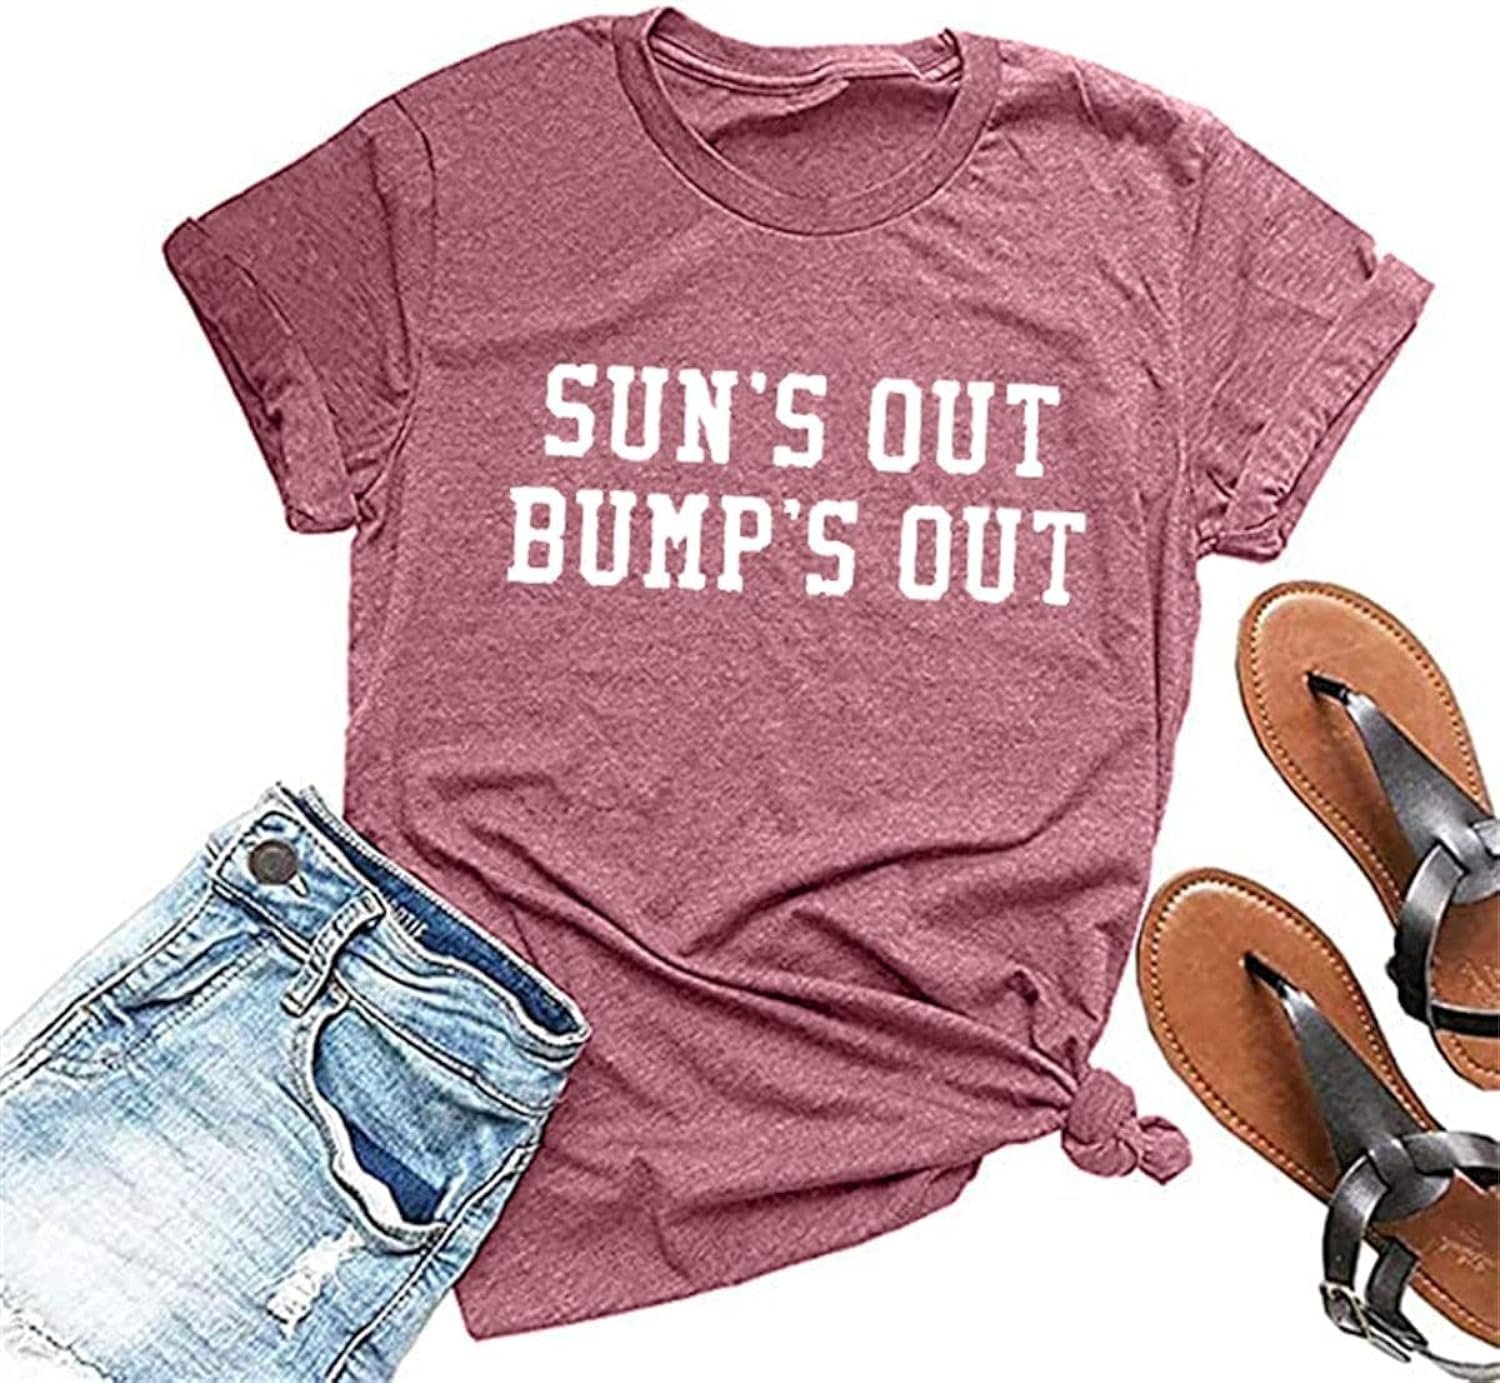 Suns Out Bumps Out Shirt Women Maternity Pregnancy Funny Saying T-Shirt Summer Short Sleeve Casual Tops Tees